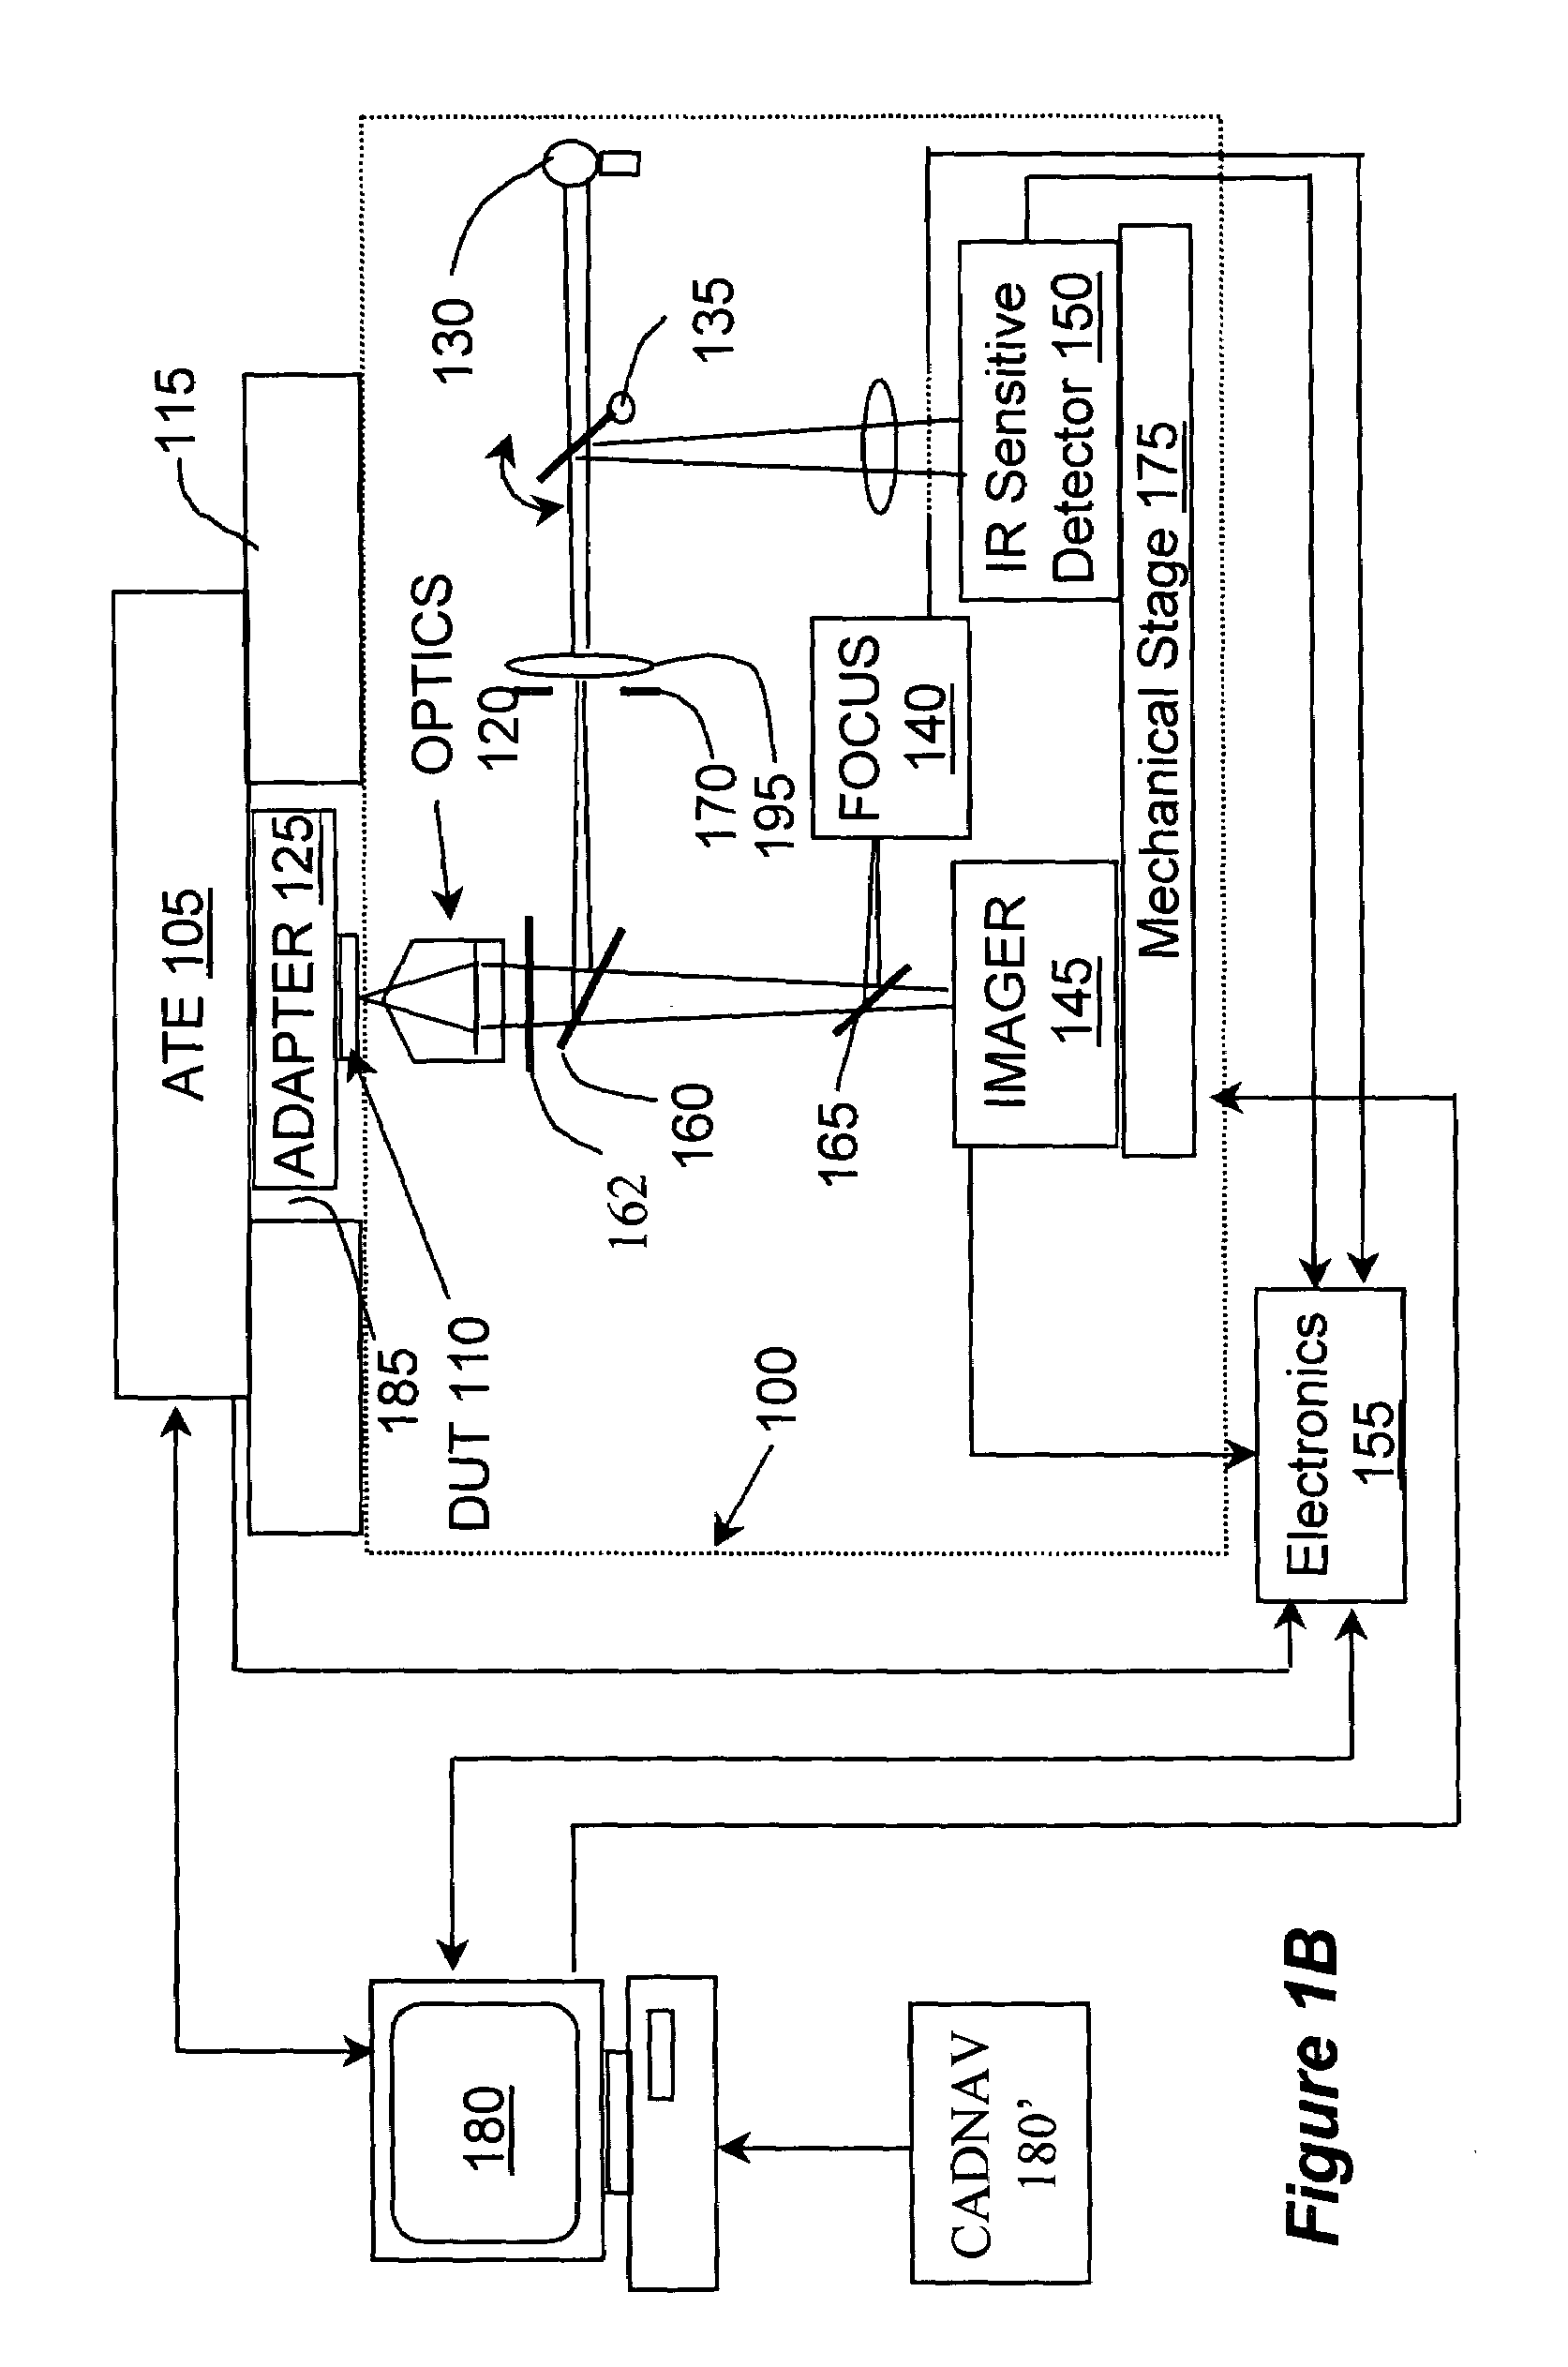 Optics landing system and method therefor